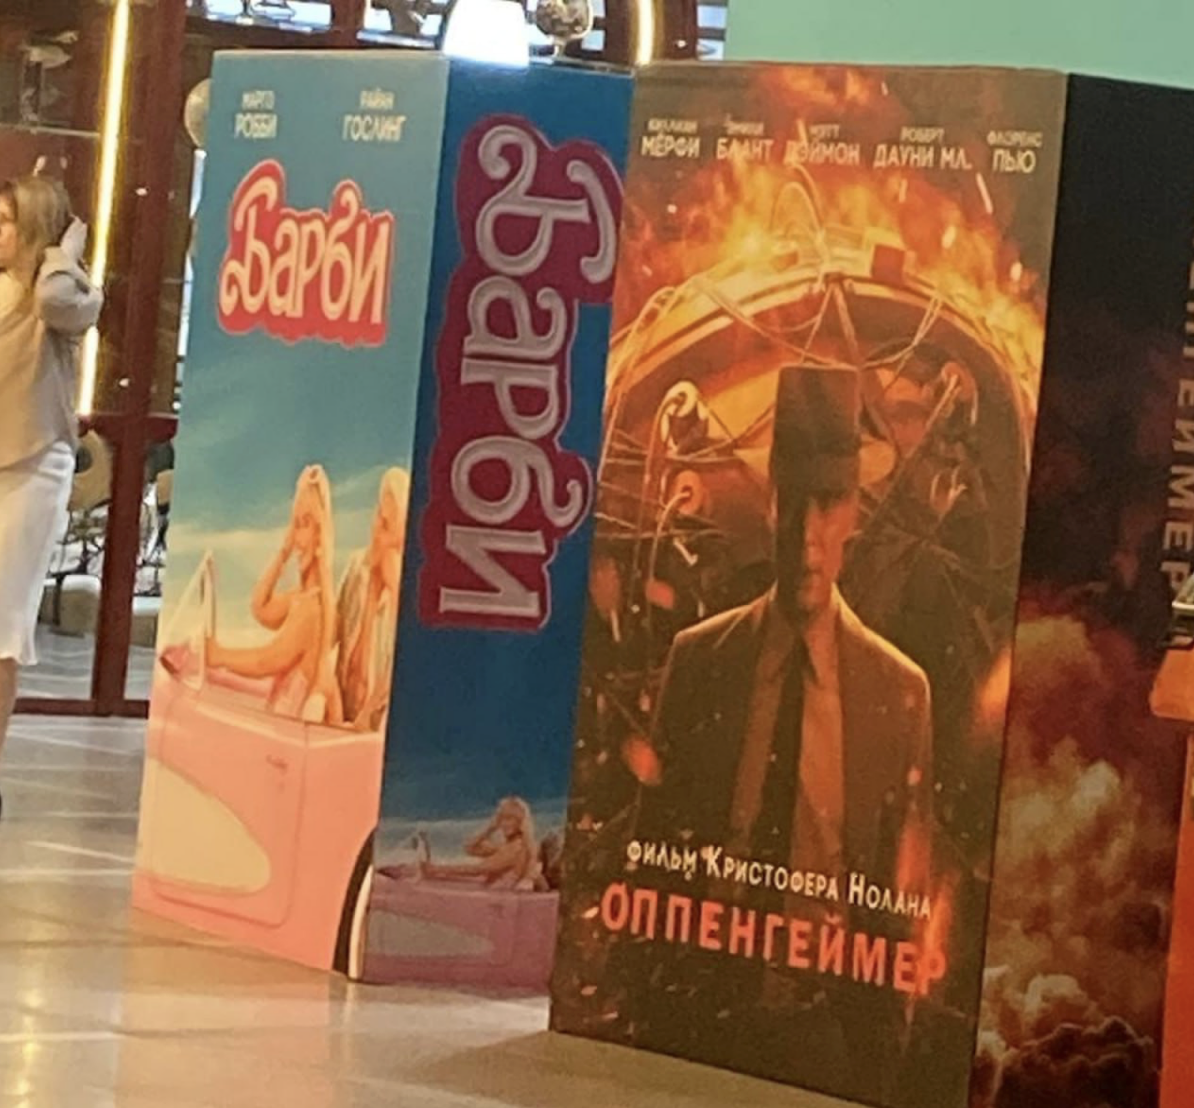 Russia has found a shameful way to show Barbie and Oppenheimer in cinemas and revealed the supplier of the ''sanctioned'' material